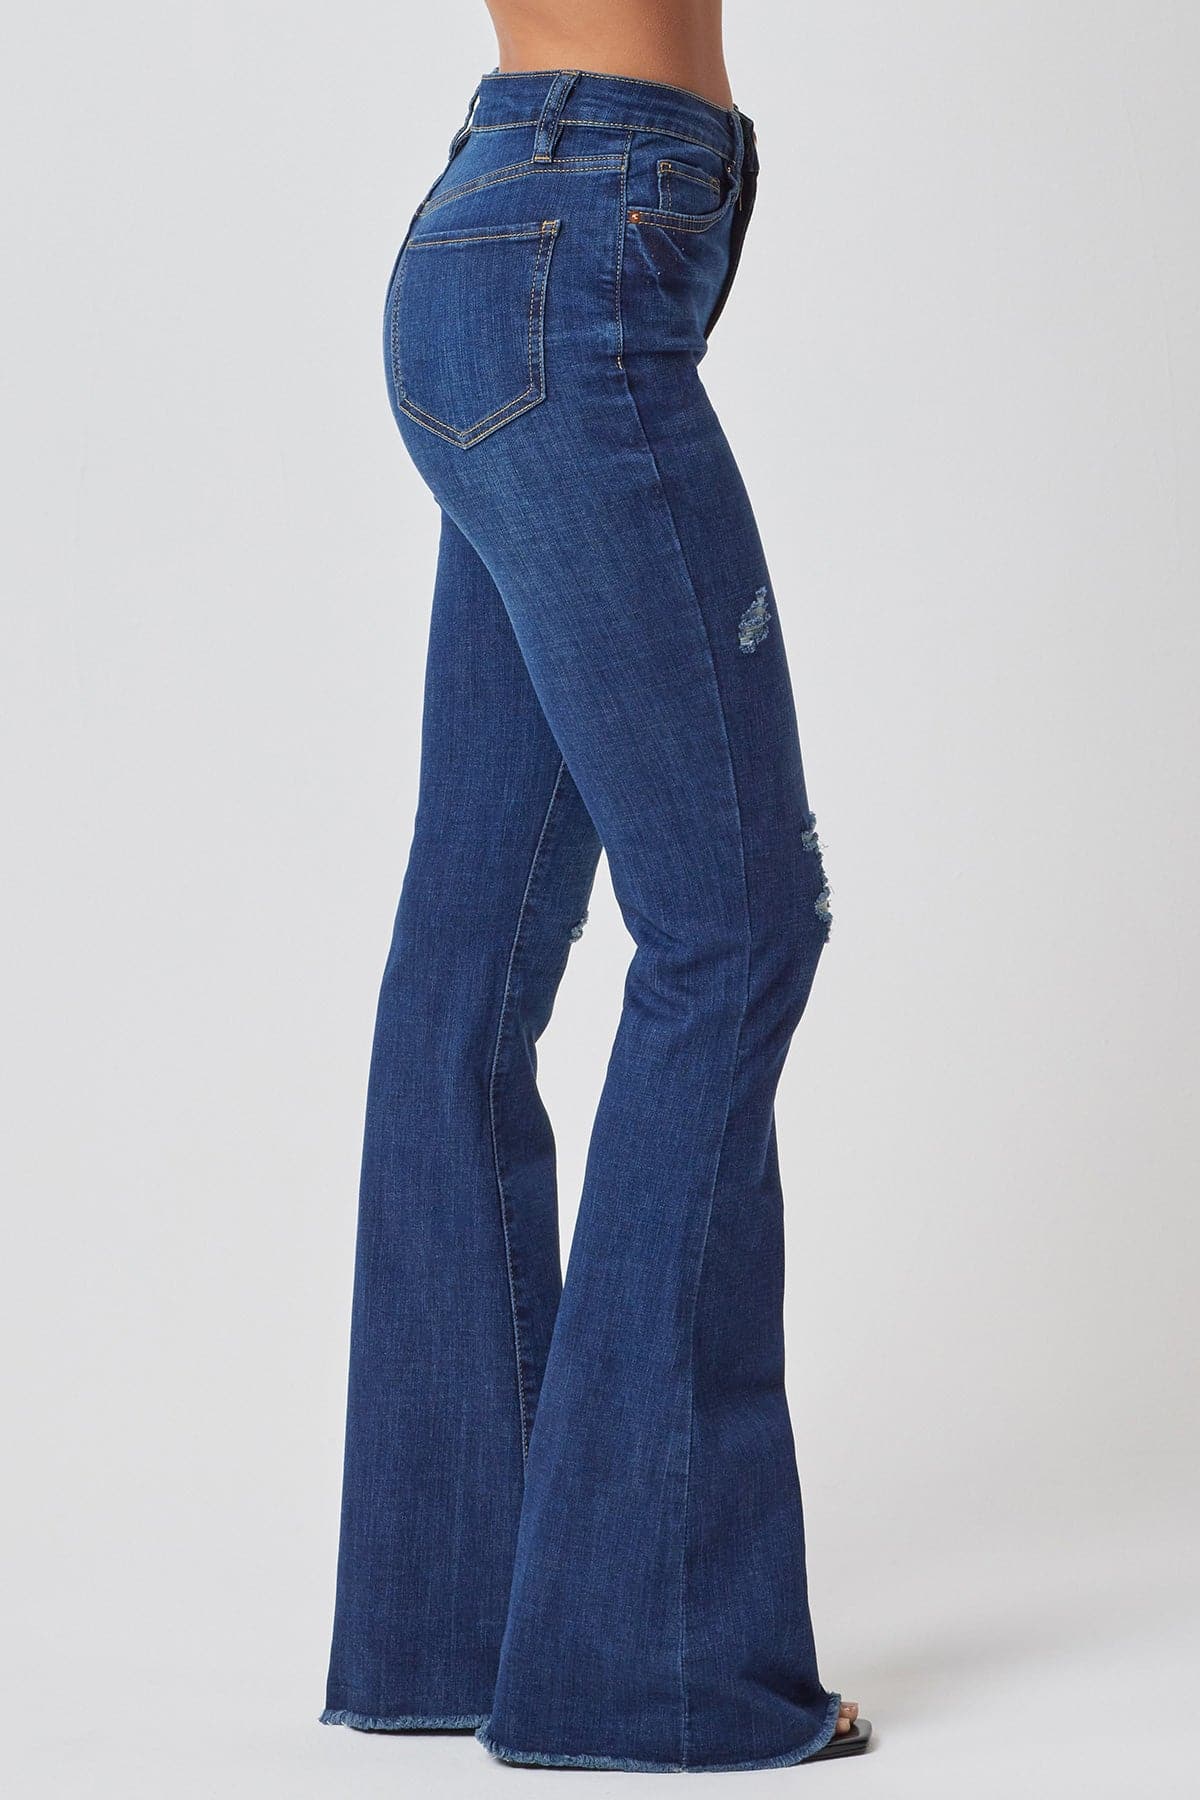 Women's High Rise Flare Jeans With Frayed Hem